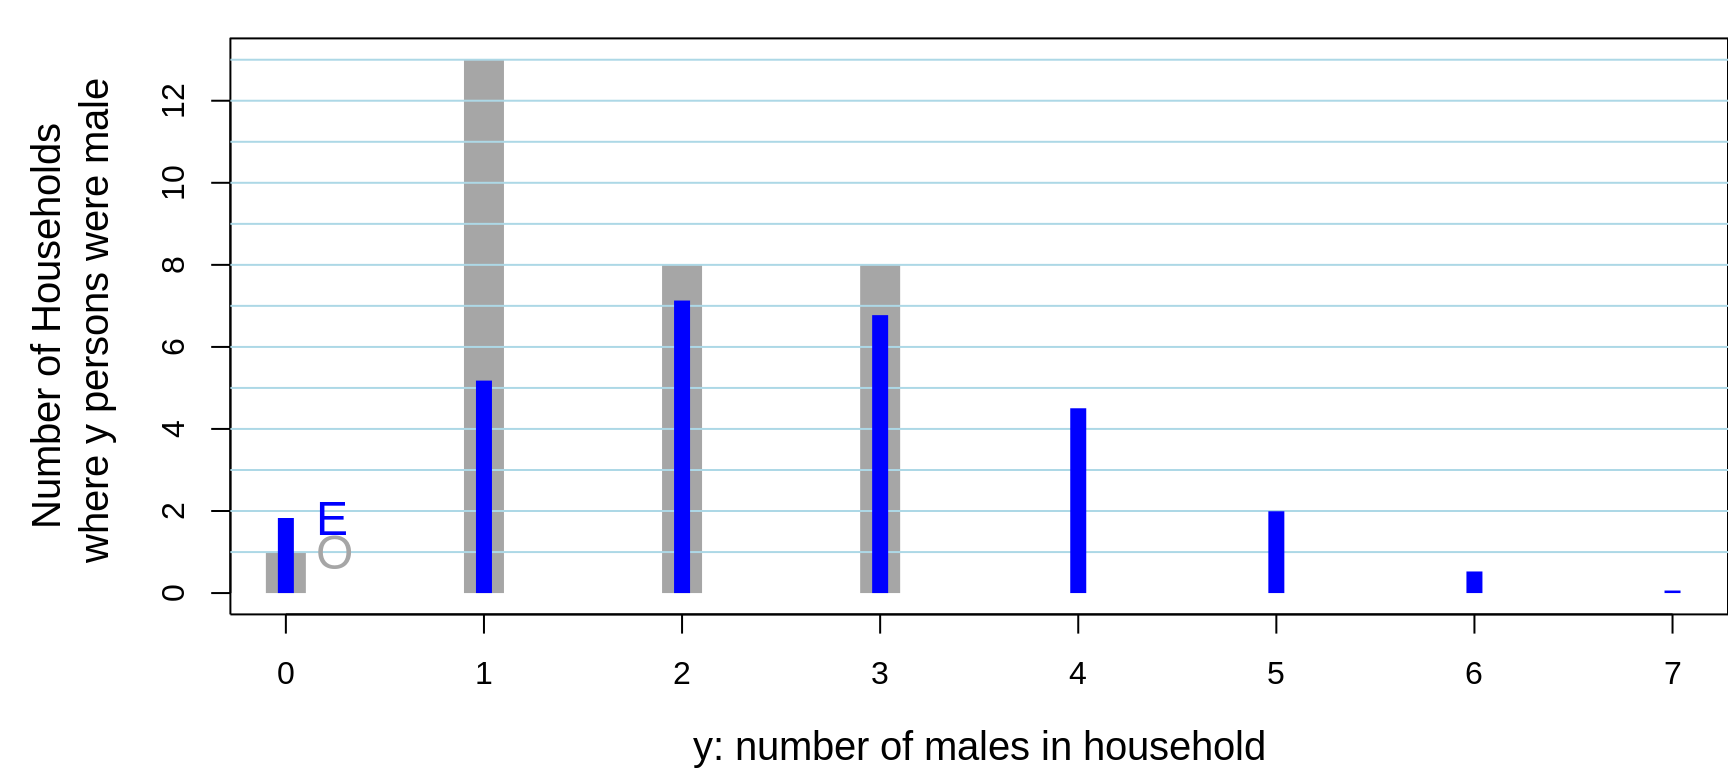 Of 30 randomly sampled households, (O)bserved  numbers of households, shown in grey, where 0, 1, .. in household were male. The 30 households contained 104 persons, 53 of whom were male. Also shown, in blue are the (E)xpected numbers of households, assuming the data were generated from 104 independent Bernoulli random variables, each with the same  probability 53/104. The observed variance is considerably SMALLER than that predicted by a binomial distribution. You would see this even if the individuals in the house were not from the same family. For example, if the occupants were students, the proportion of them with such a history would be different (?lower) than if the occupants were older: this is the 'non-identical probabilities' aspect. The other possibility, the 'non-independence' aspect, is that health status and the seeking medical care are affected by shared family factors, such as behaviours, attitudes, lifestyle, and insurance coverage.